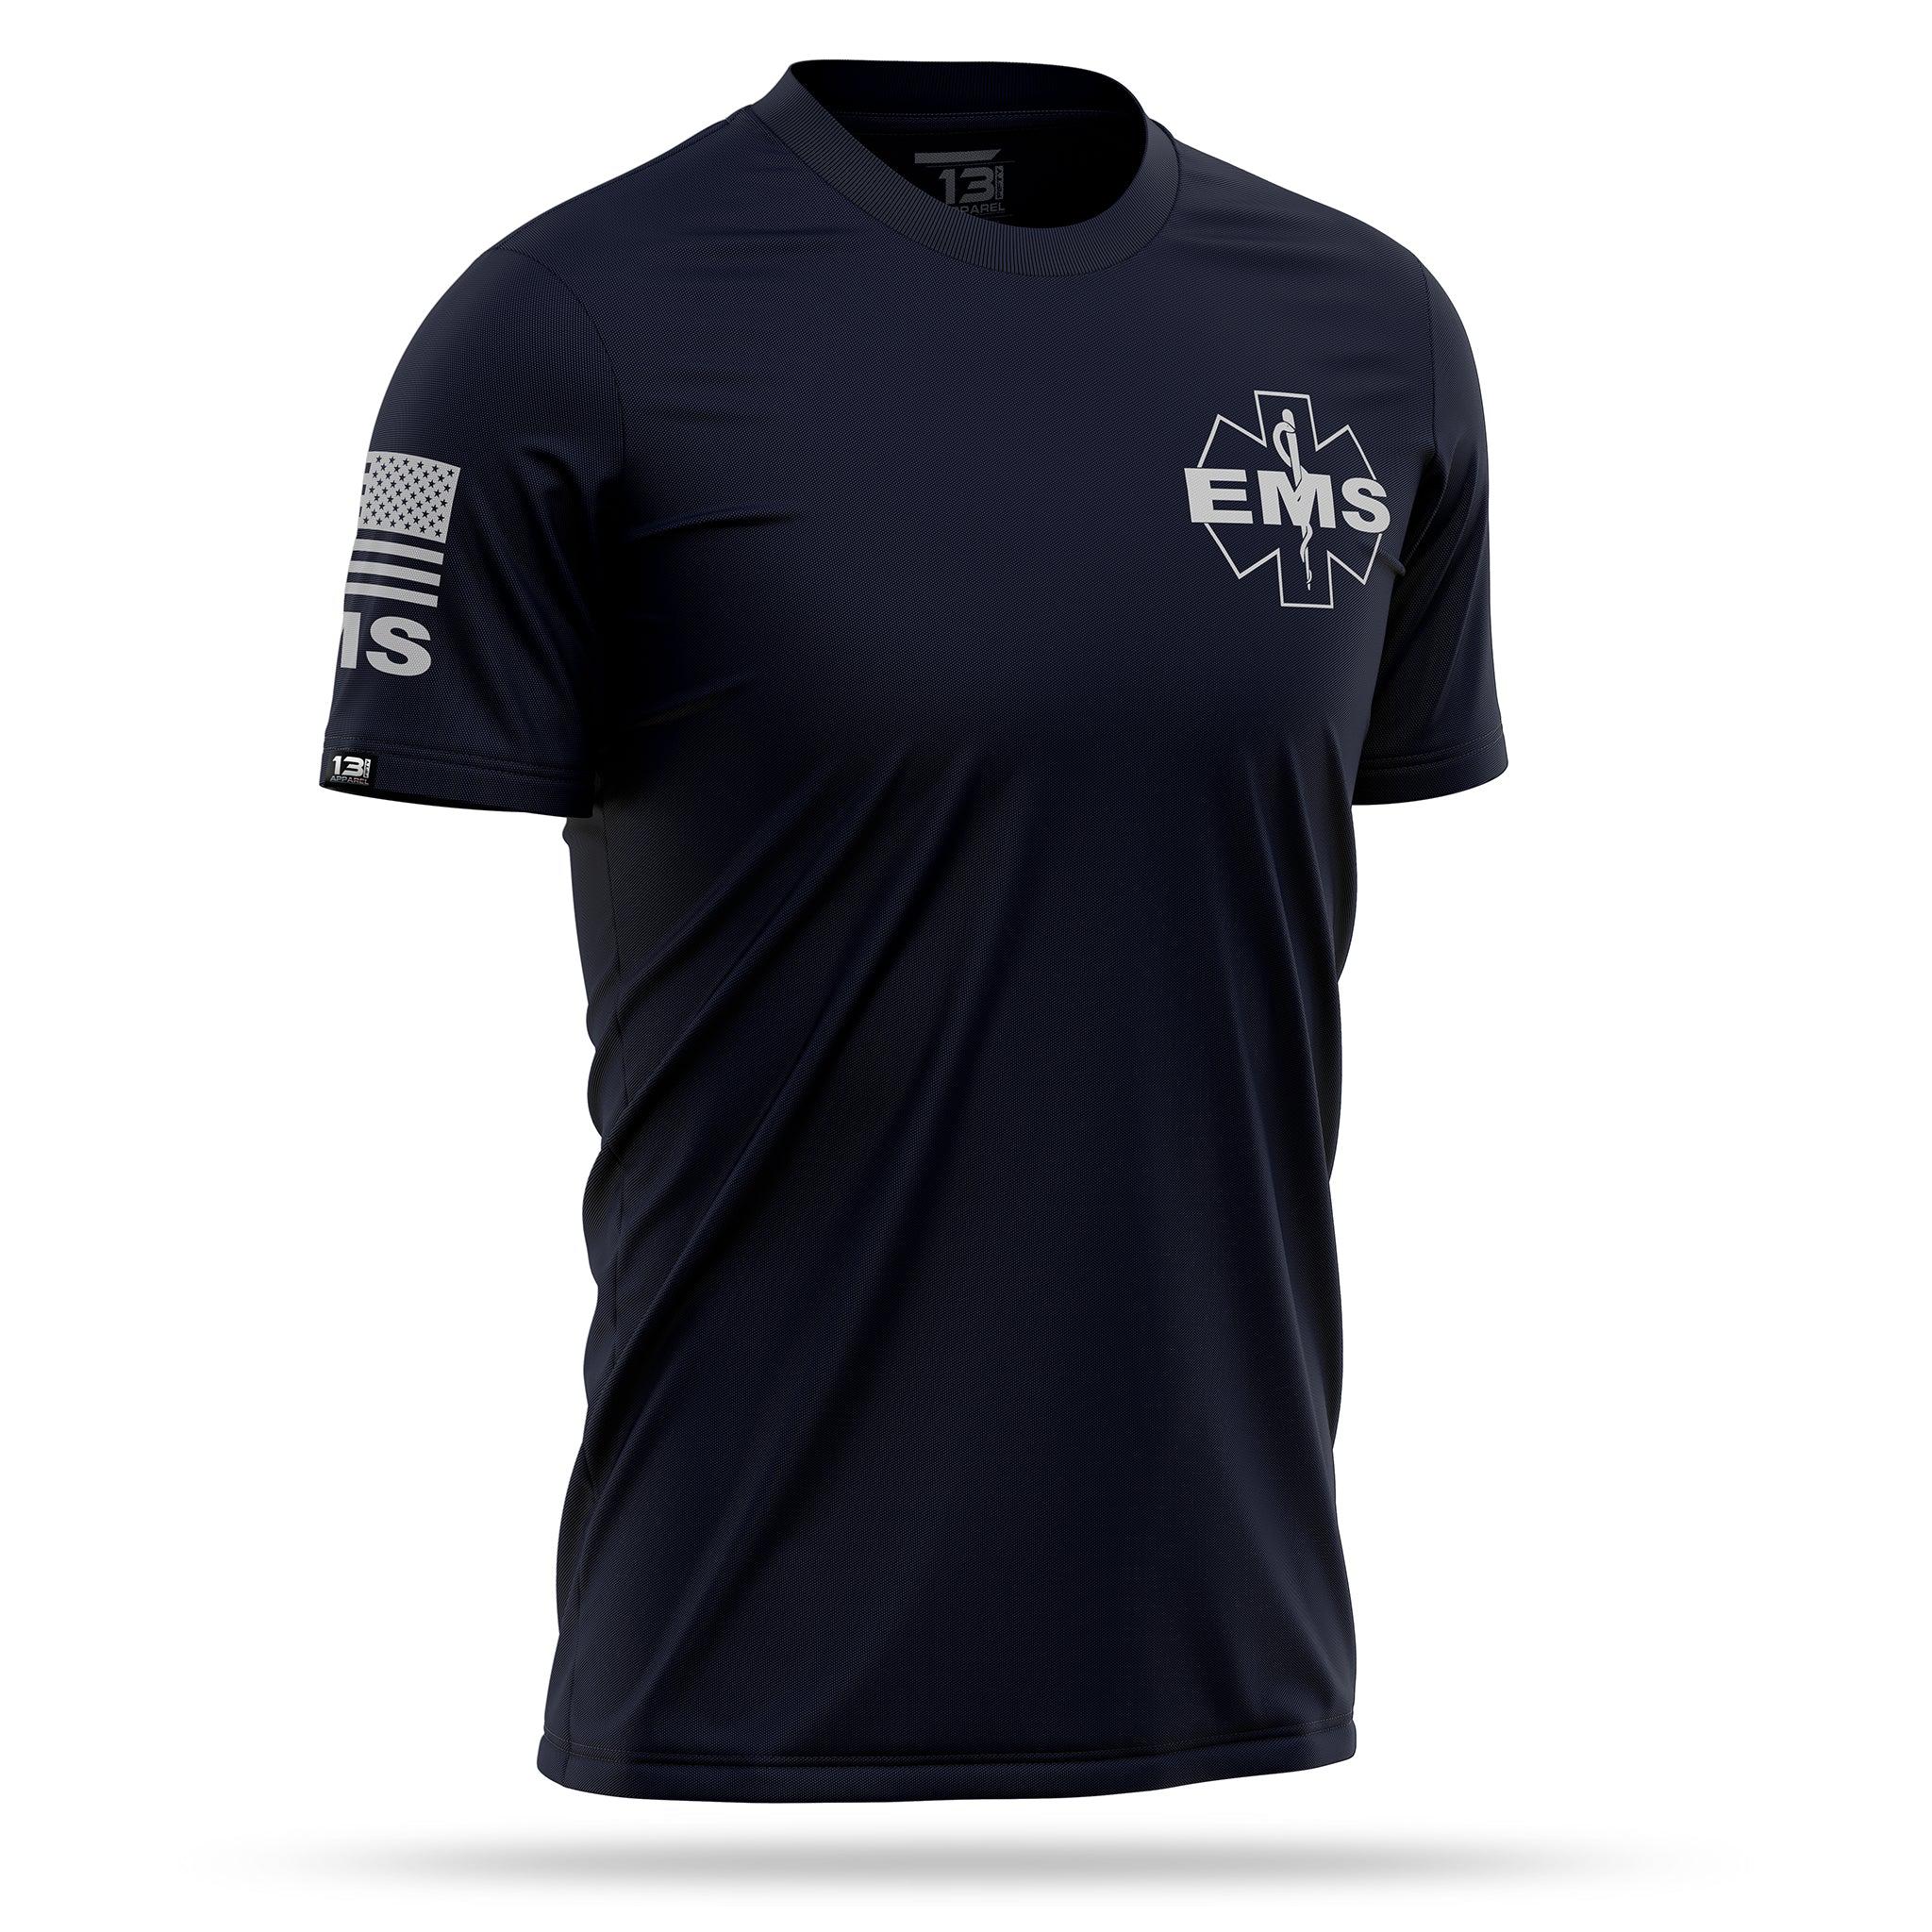 13 Fifty Apparel | [SCOOP] Men's EMS Shirt [BLU/WHI] | 13 Fifty Apparel